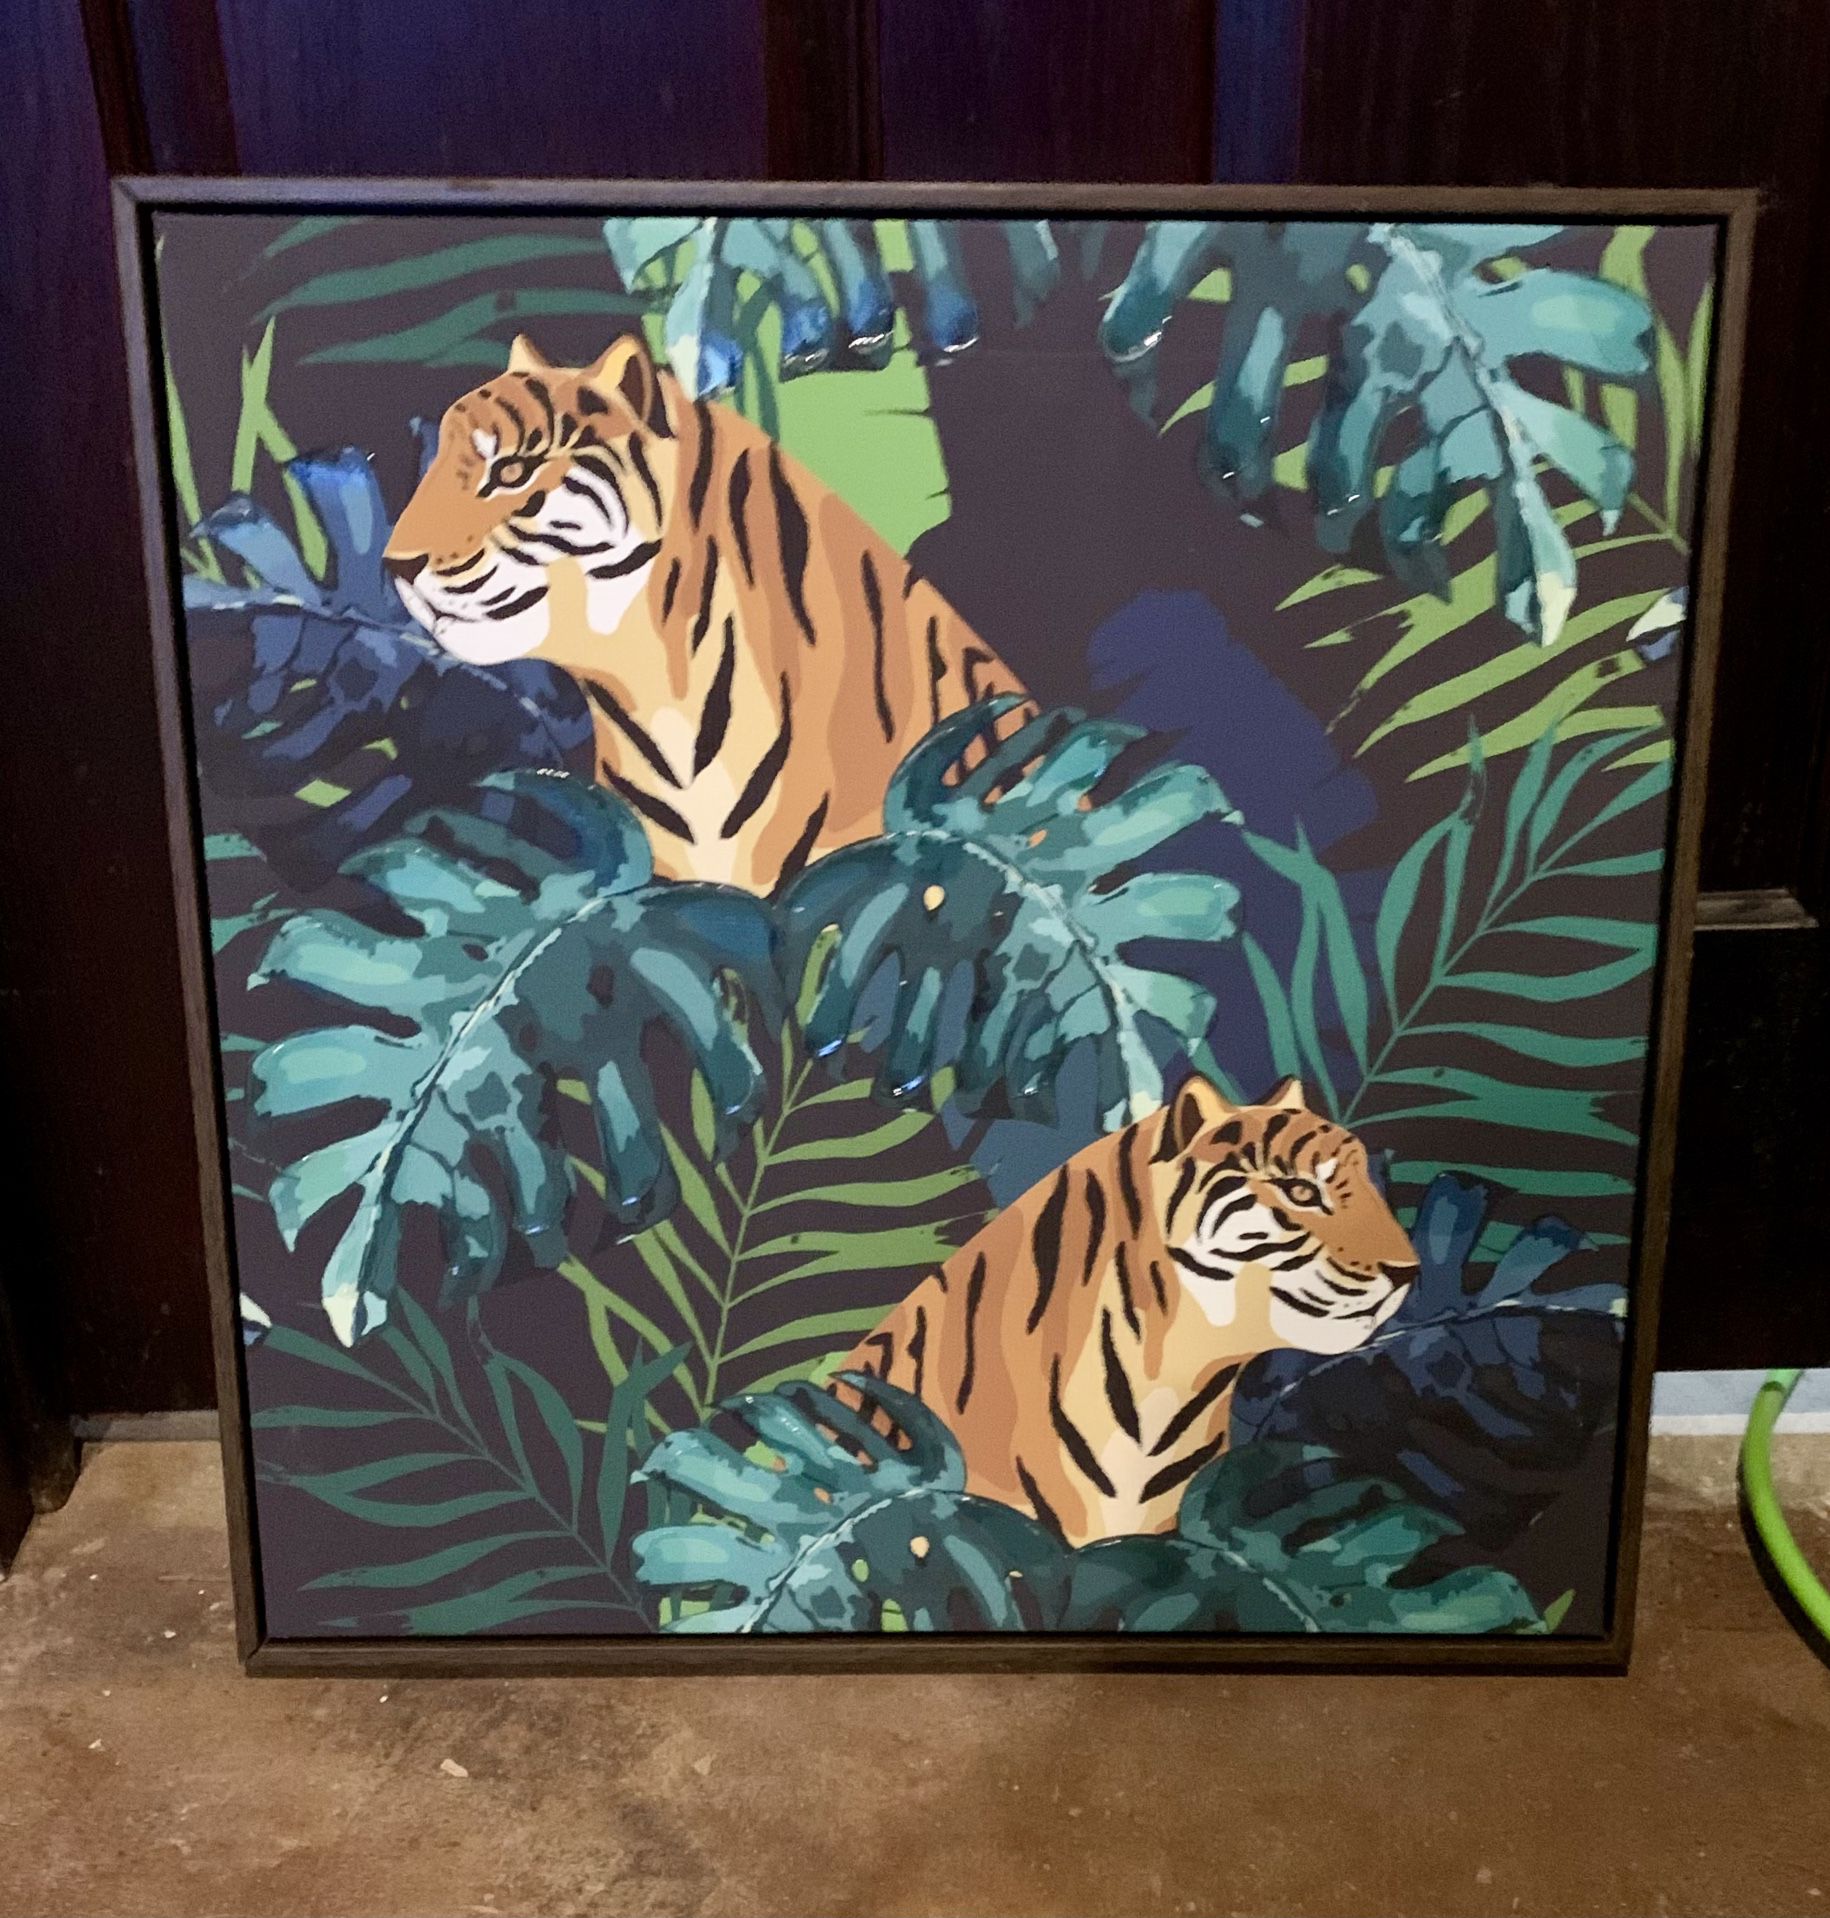 New Tiger Painting 